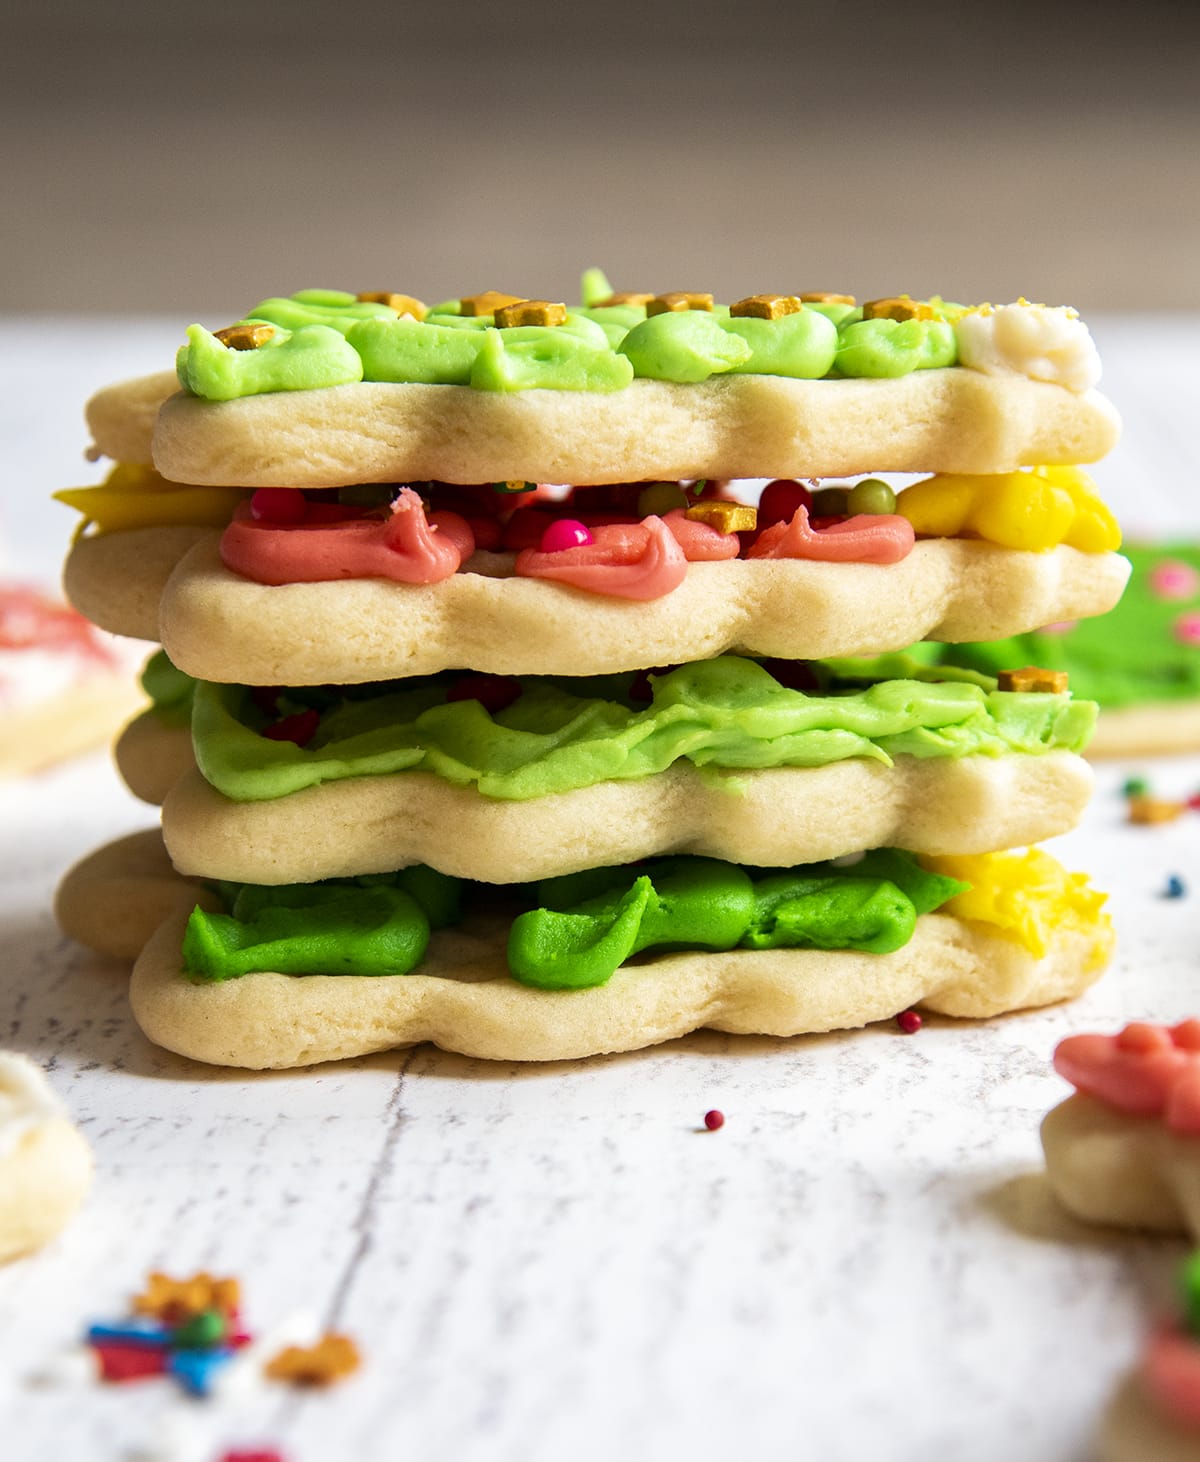 A stack of 4 Christmas tree sugar cookies showing the thick cookie and frosting on top.